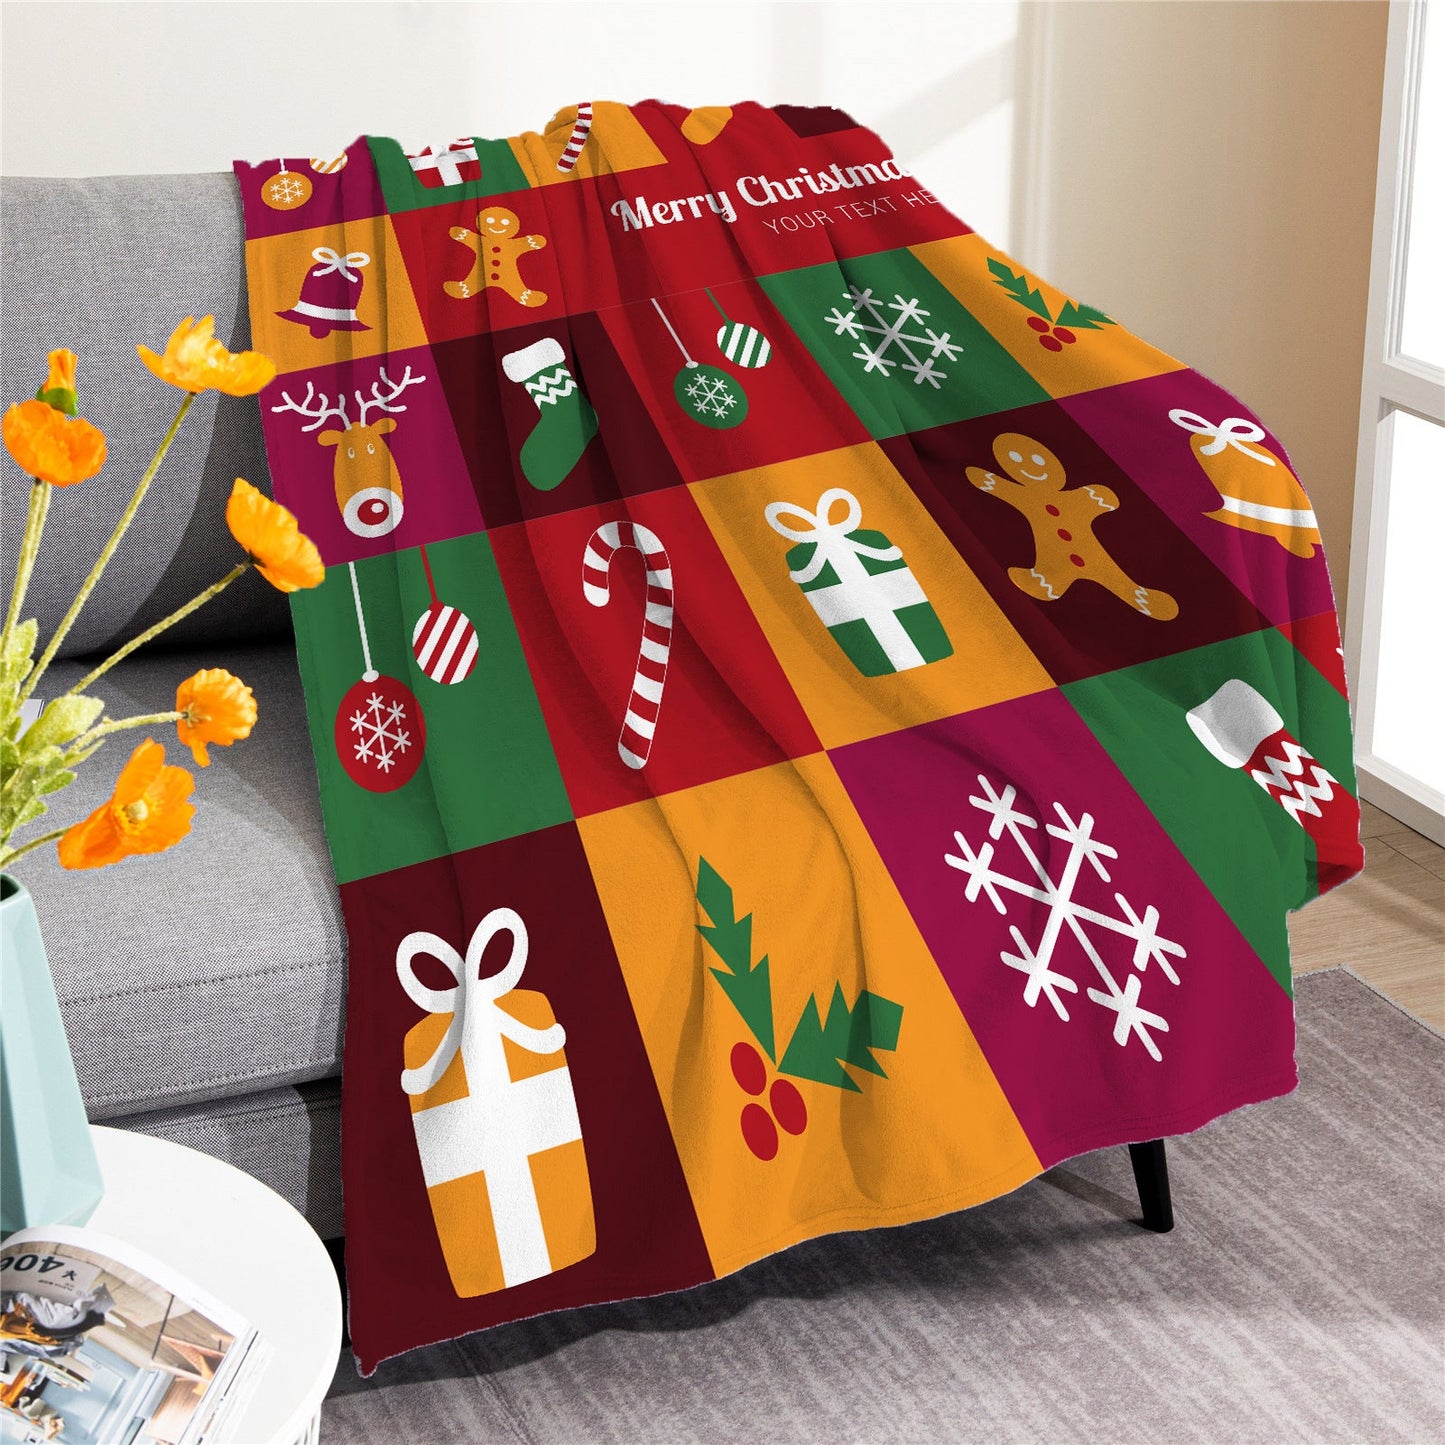 Merry Christmas Soft Fleece Throw Blankets-Blankets-M20220916-2-50*60 inches-Free Shipping at meselling99